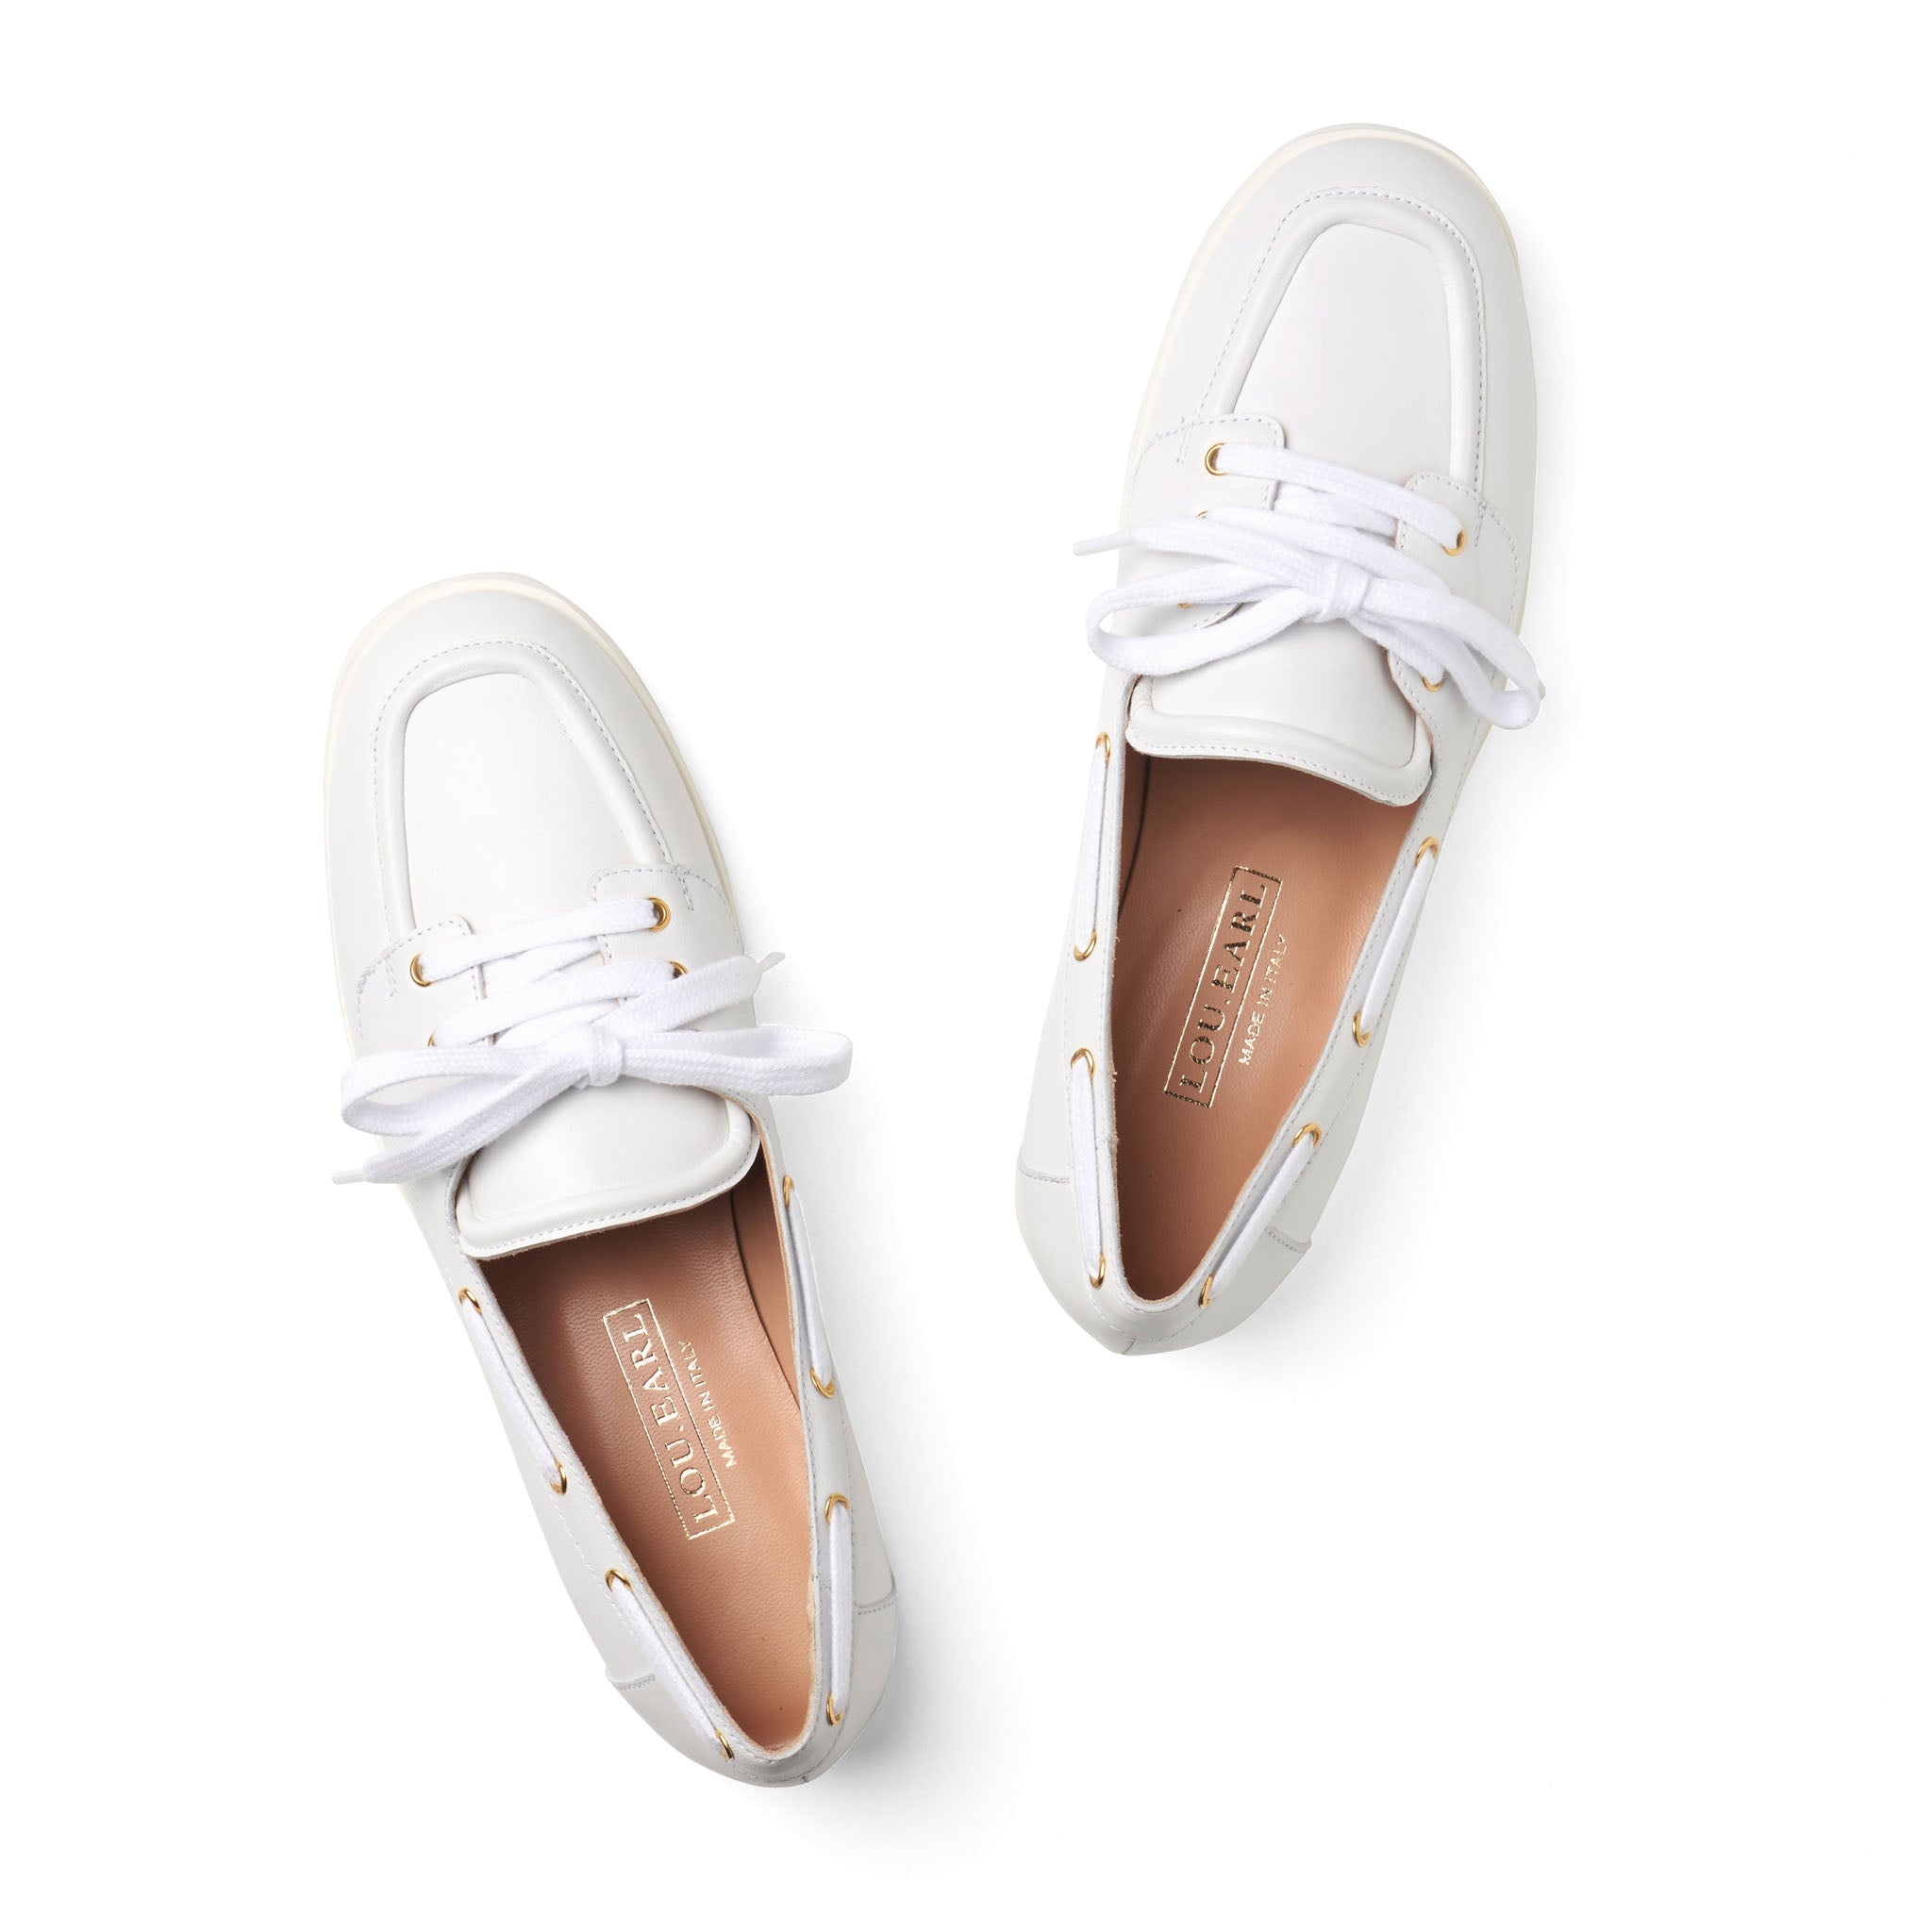 sporty slip on leather white comfortable boat shoes for women